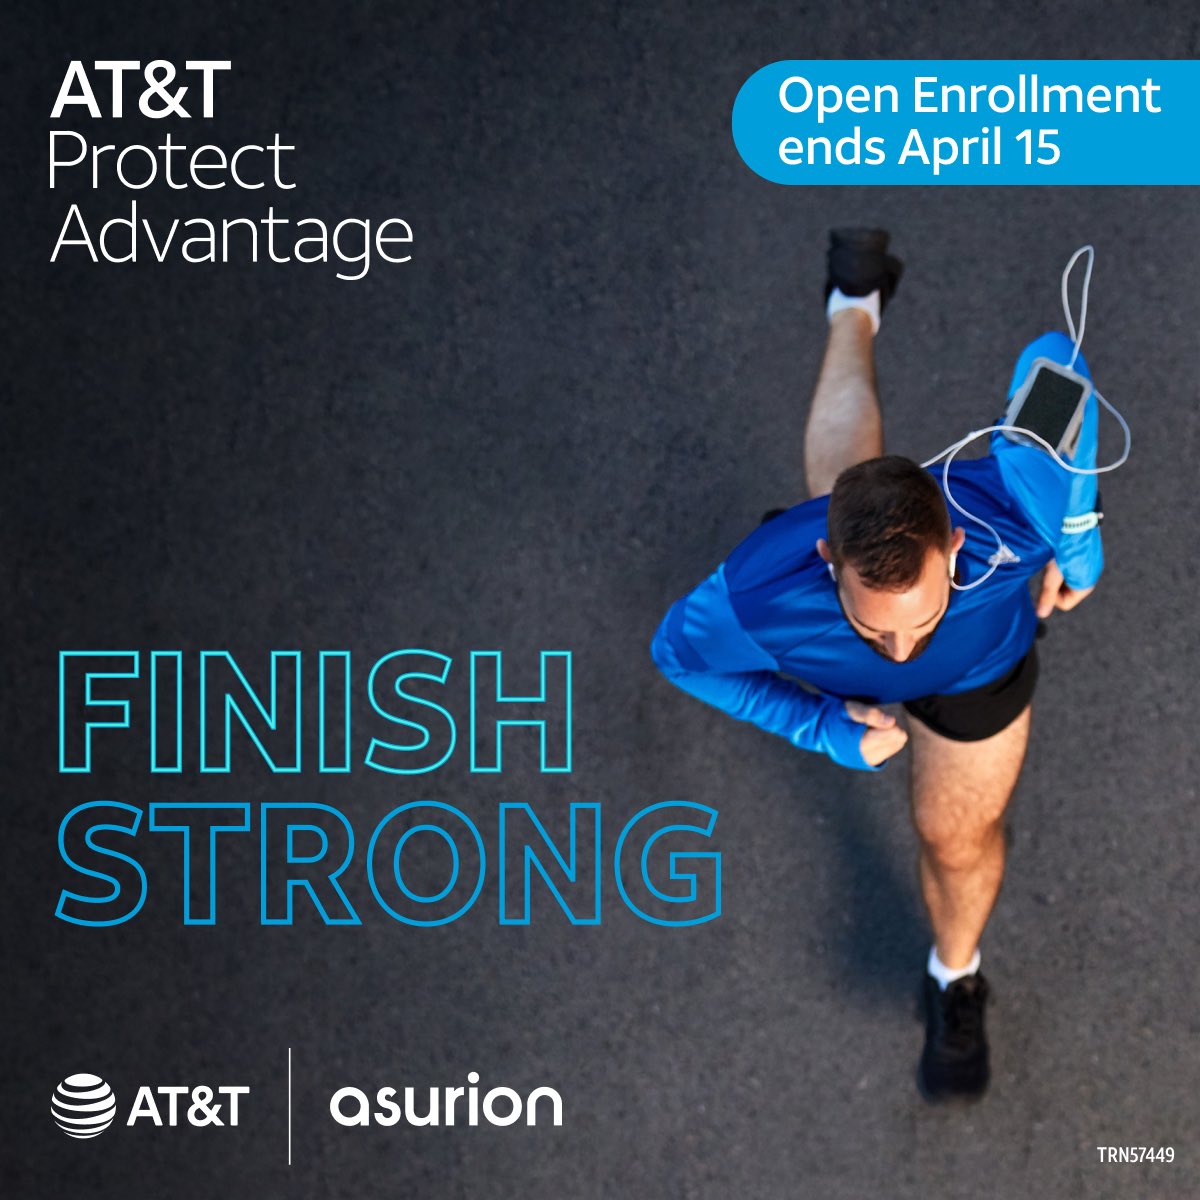 New England! Time is running out for Open Enrollment for #ProtectAdvantage! It’s the last weekend & one full week until it’s over. Let’s finish strong and #LightItUpNE! #DontGoBrackenMyPhone @TheRealOurNE @firas_smadi @LillardDerick @pnixnix